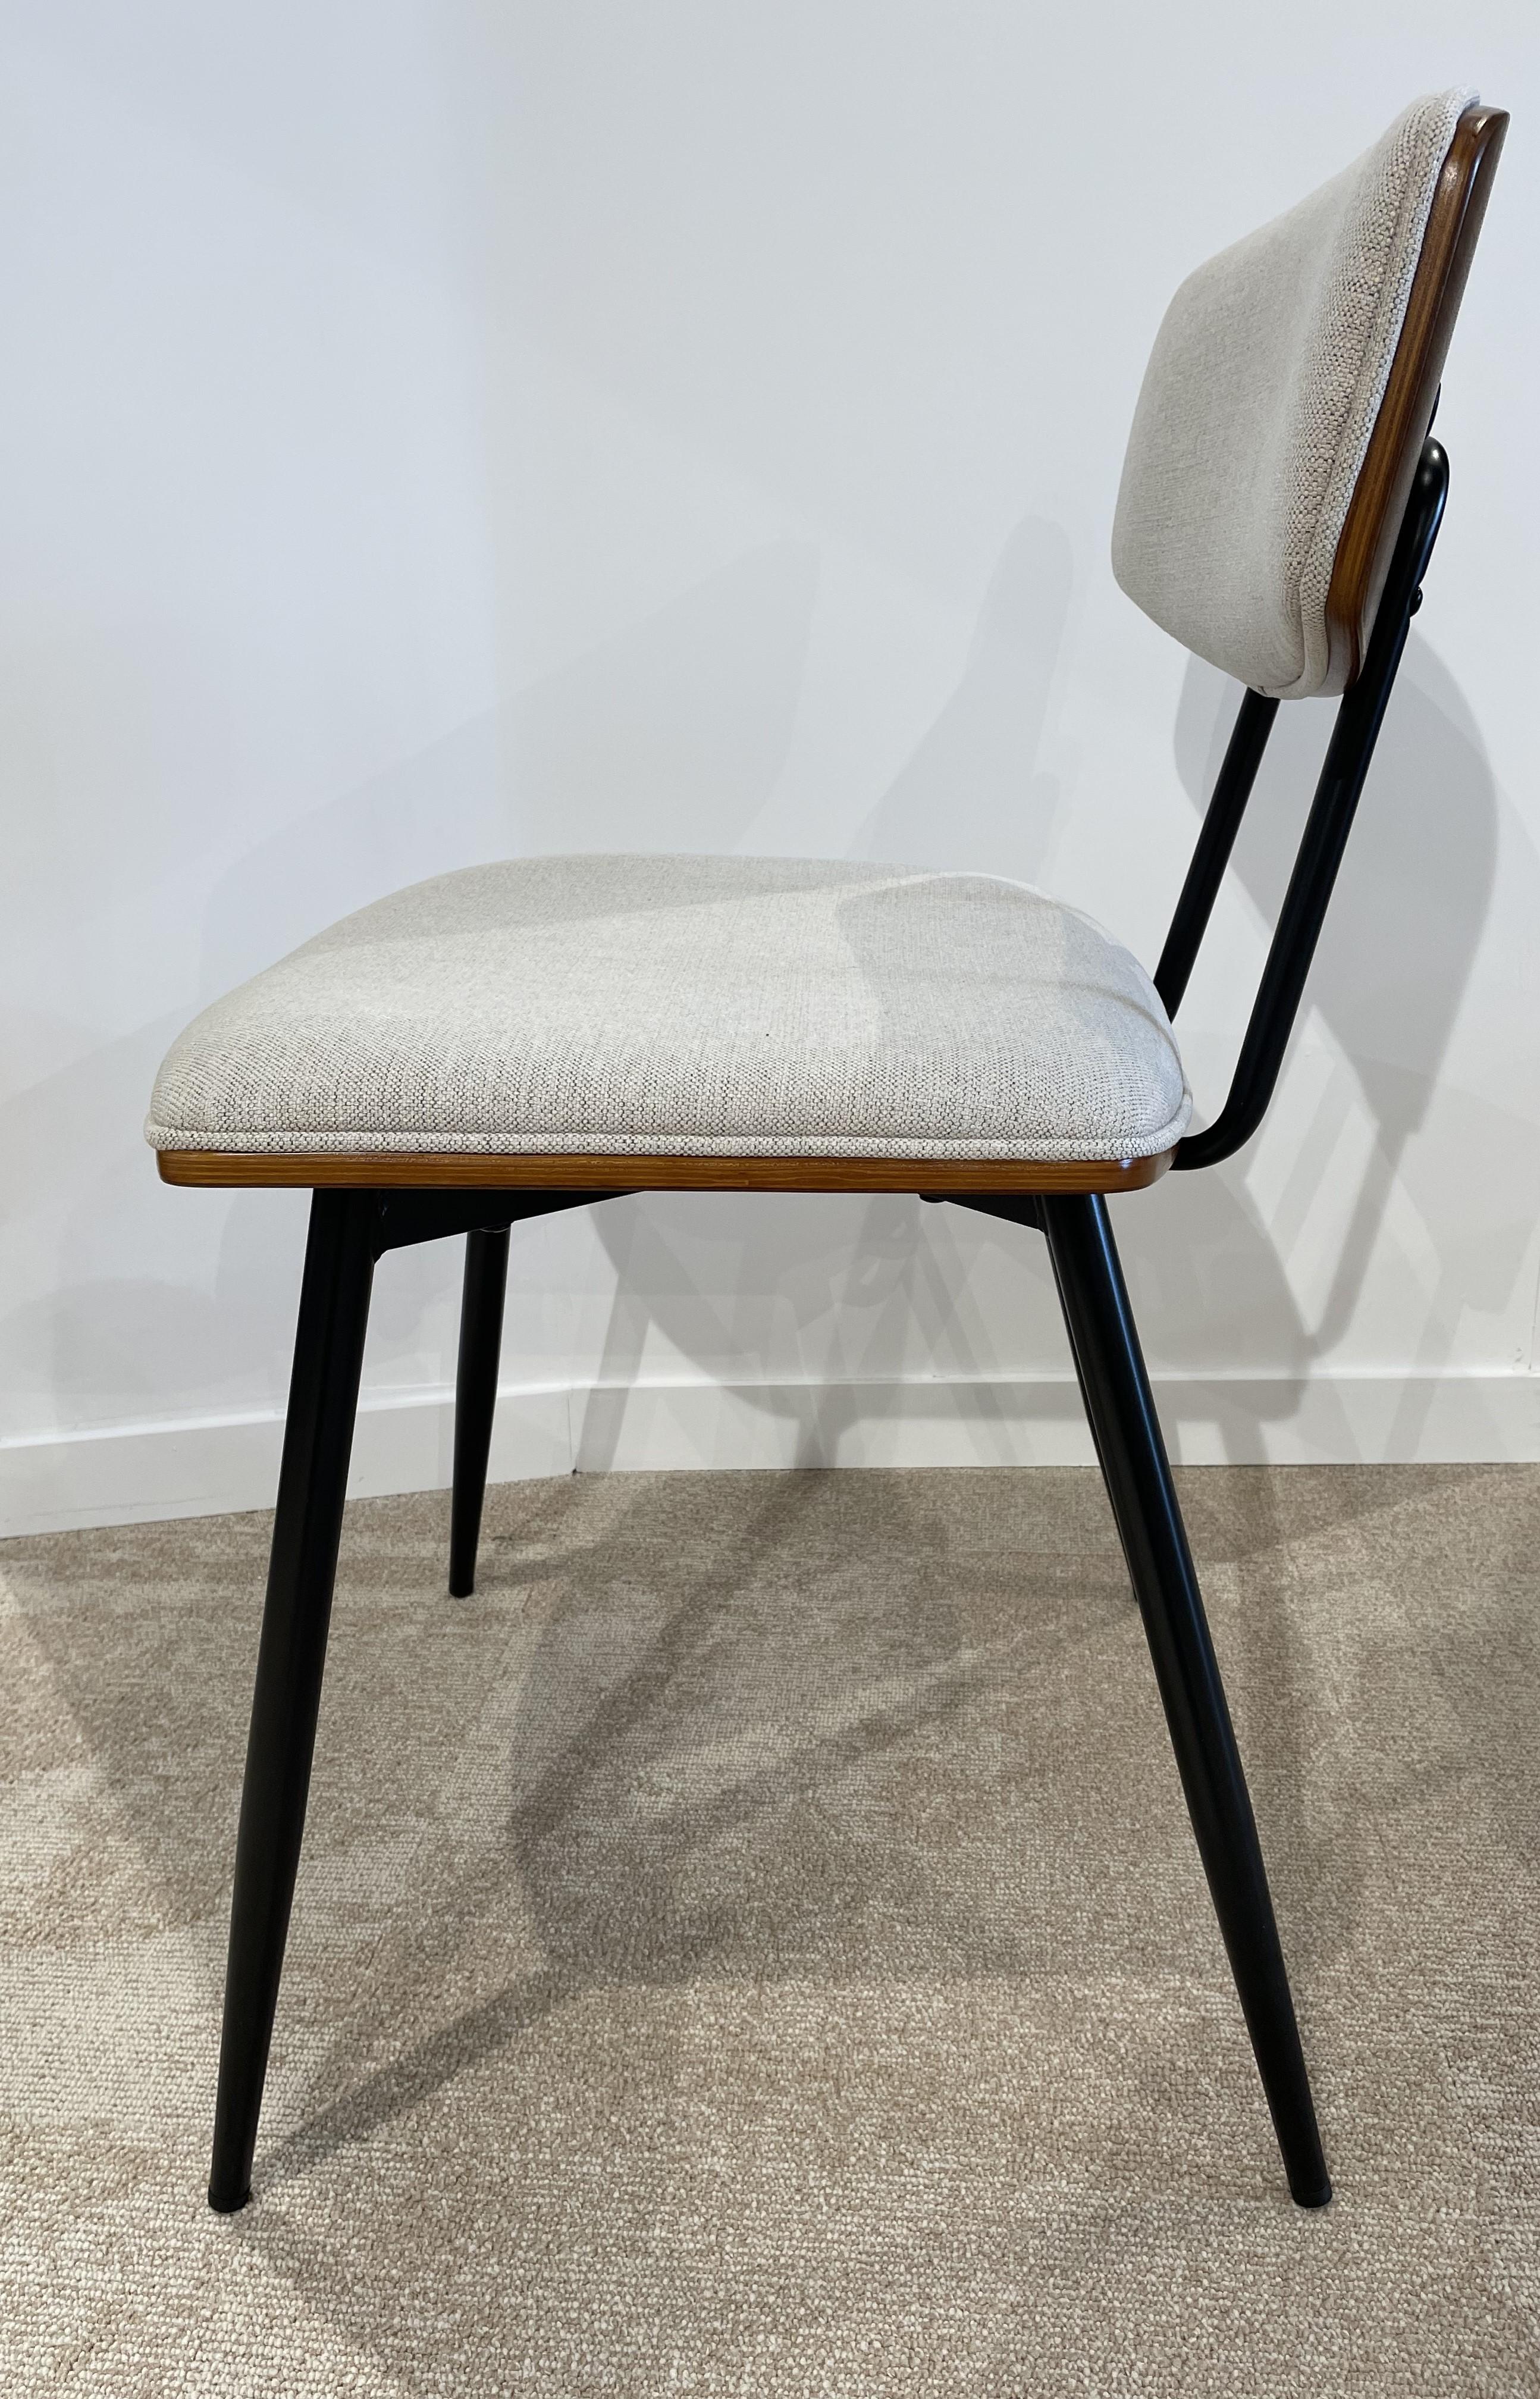 Contemporary 1950s, Design and Mid-Century Design Style Plywood, Black Metal and Fabric Chair For Sale